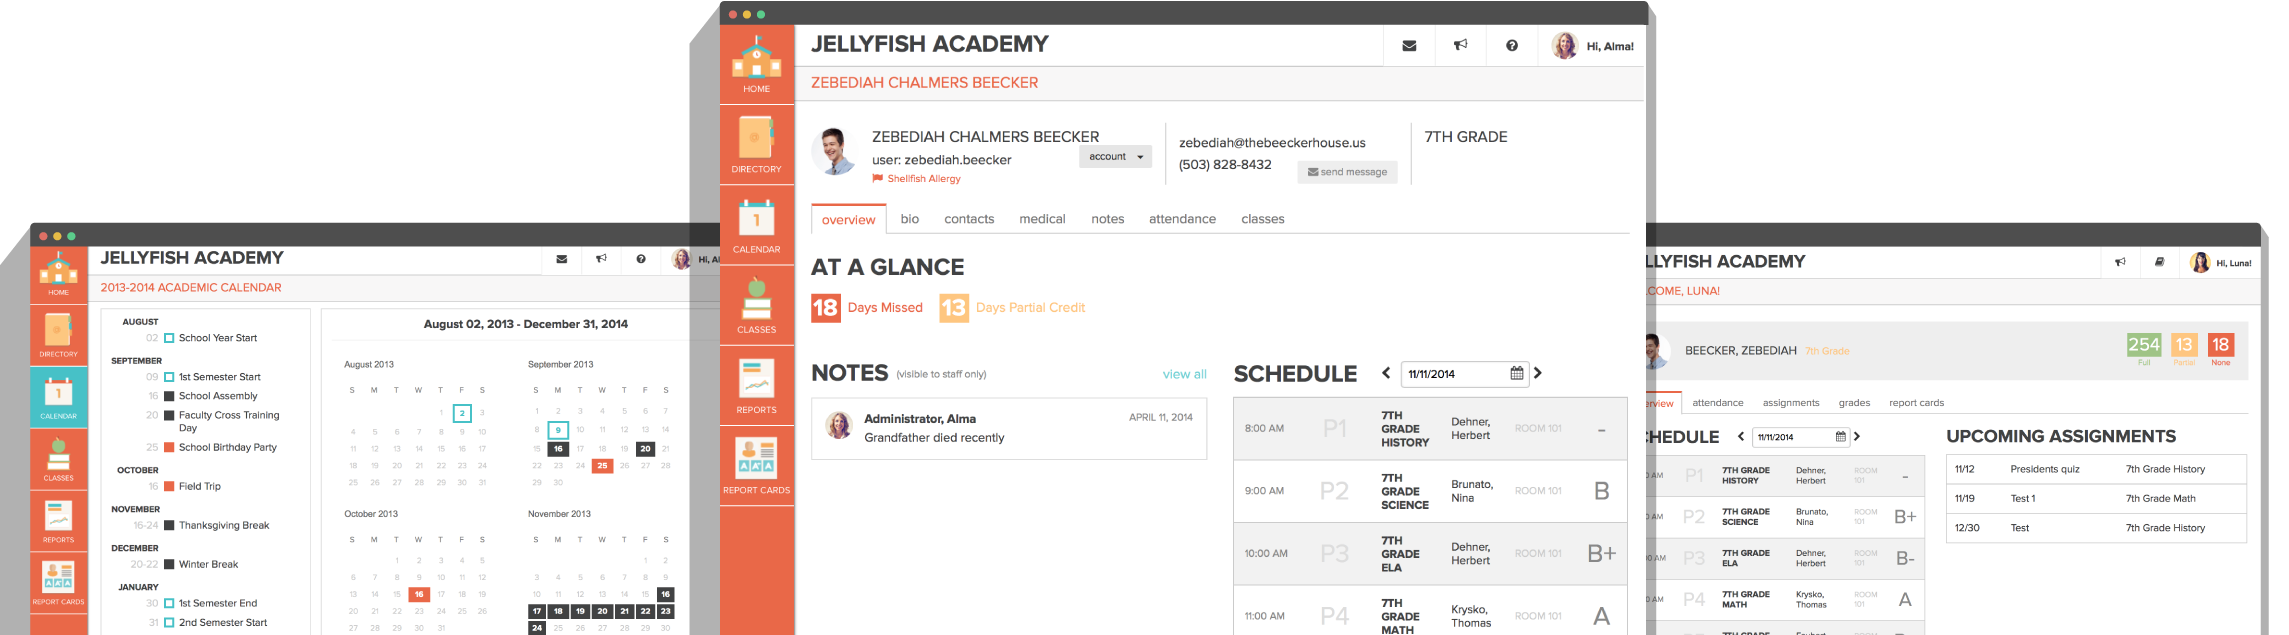 3 portal screenshots for school SIS dashboard and attendance system